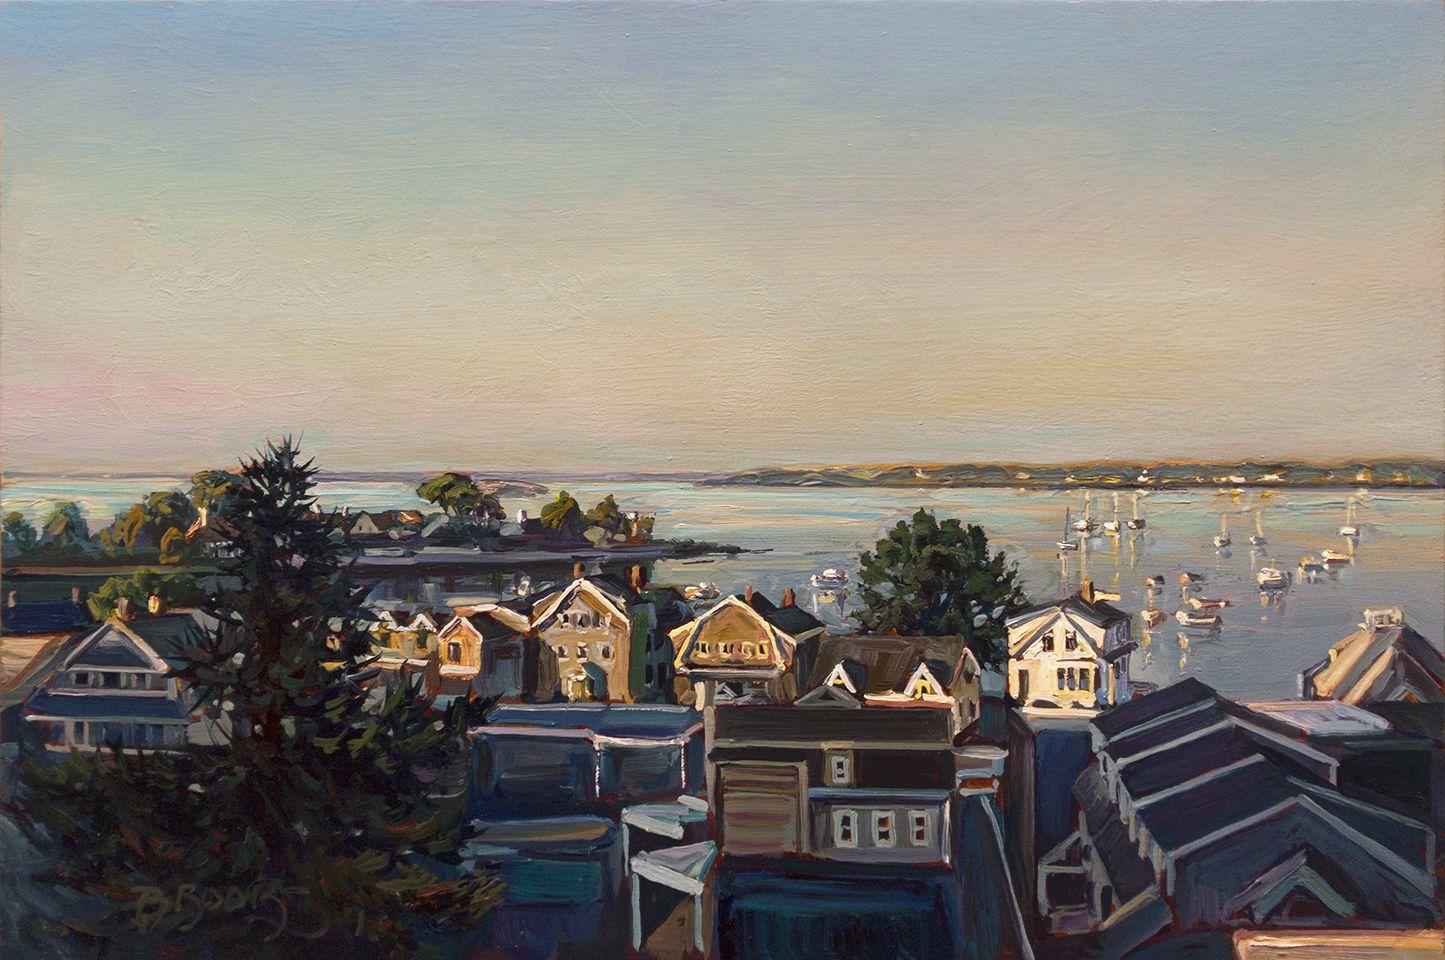 As a west coast artist, when painting the nuances of the East Coast light, I find an additional challenge or two: the subject matter, great attention to detail, and the ability to paint historic structures. All of this is somewhat foreign to me, and